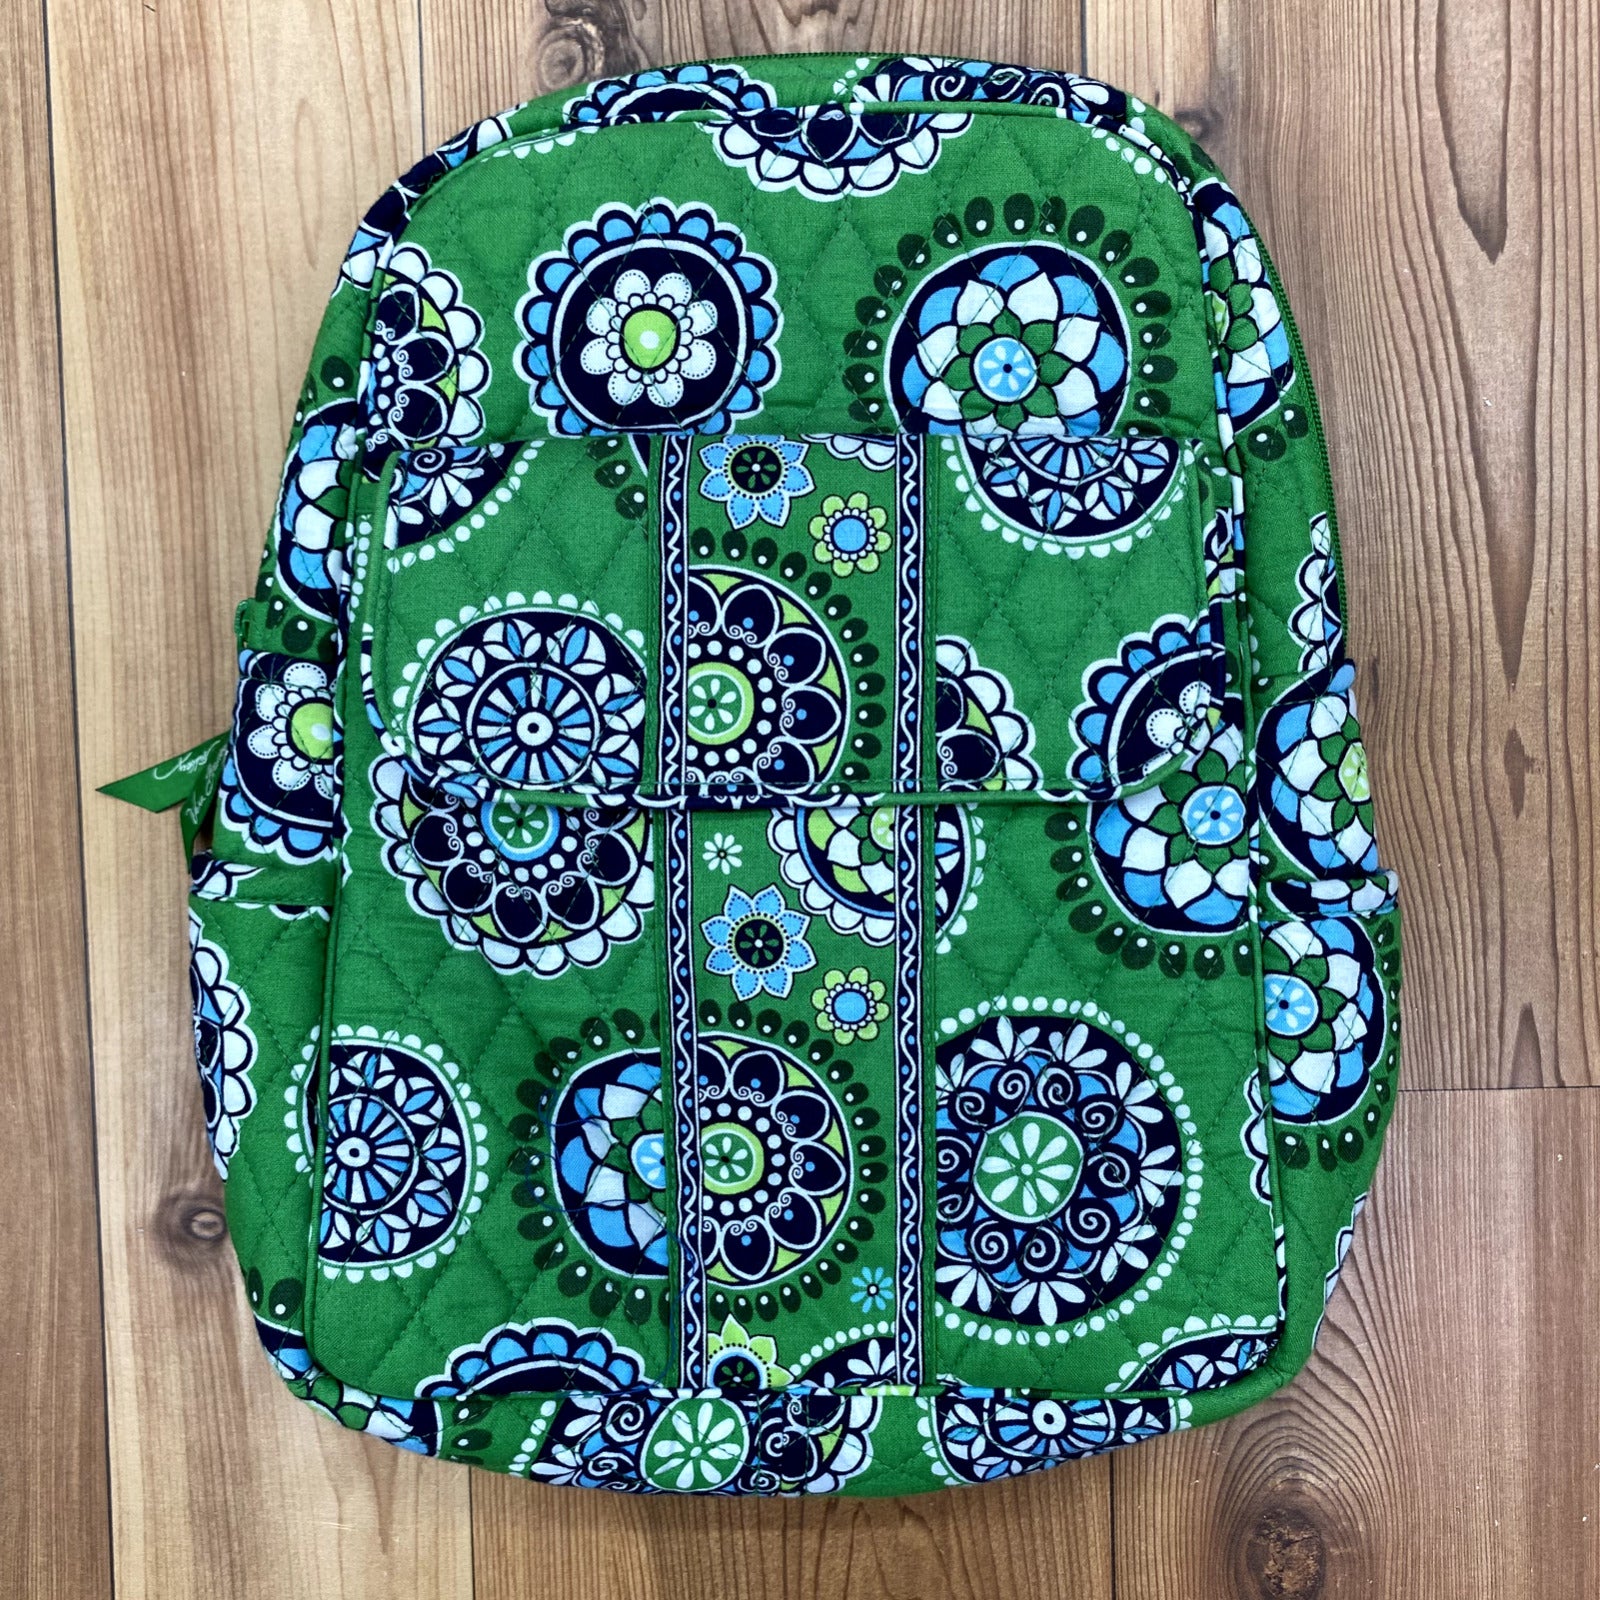 Vera Bradley Green Paisely Sunburst Tablet 100% Cotton Backpack Size Small